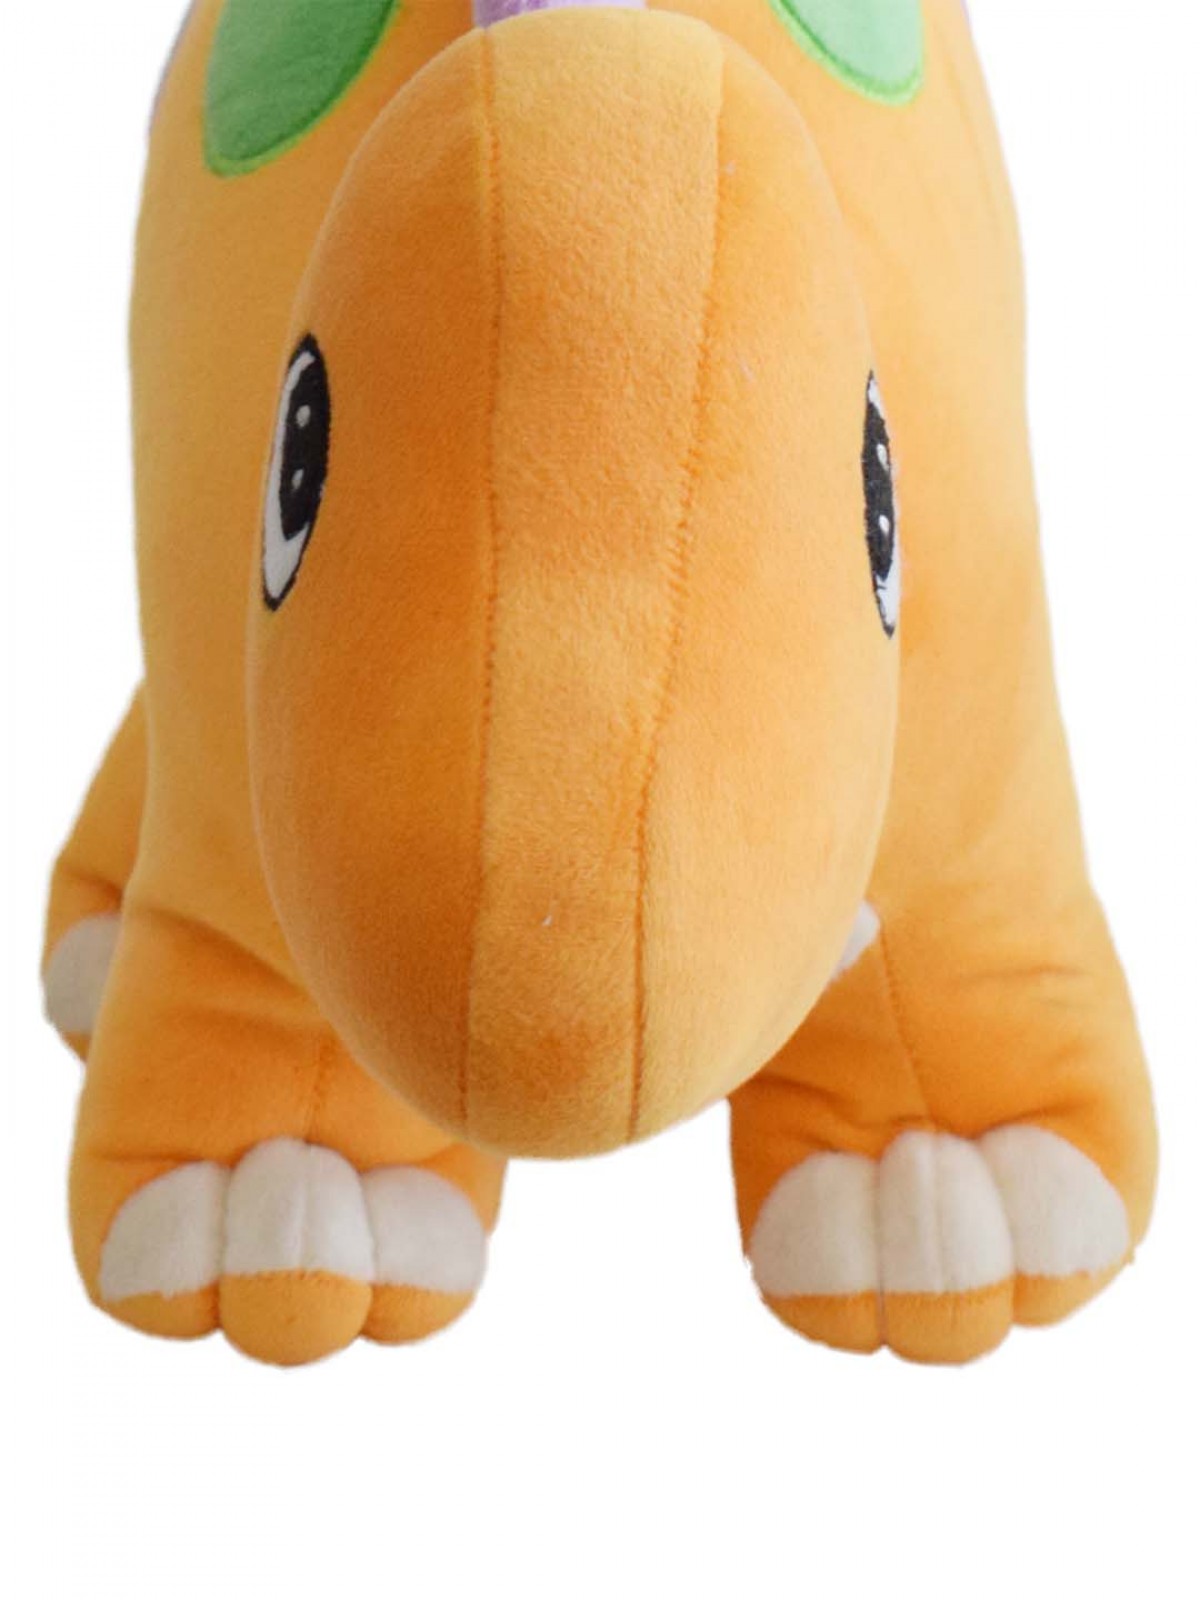 Adorable Stuffed Plush Dinosaur By Mirada, Soft Toys For Kids Of All Ages, 3Y+, Orange, 50Cm